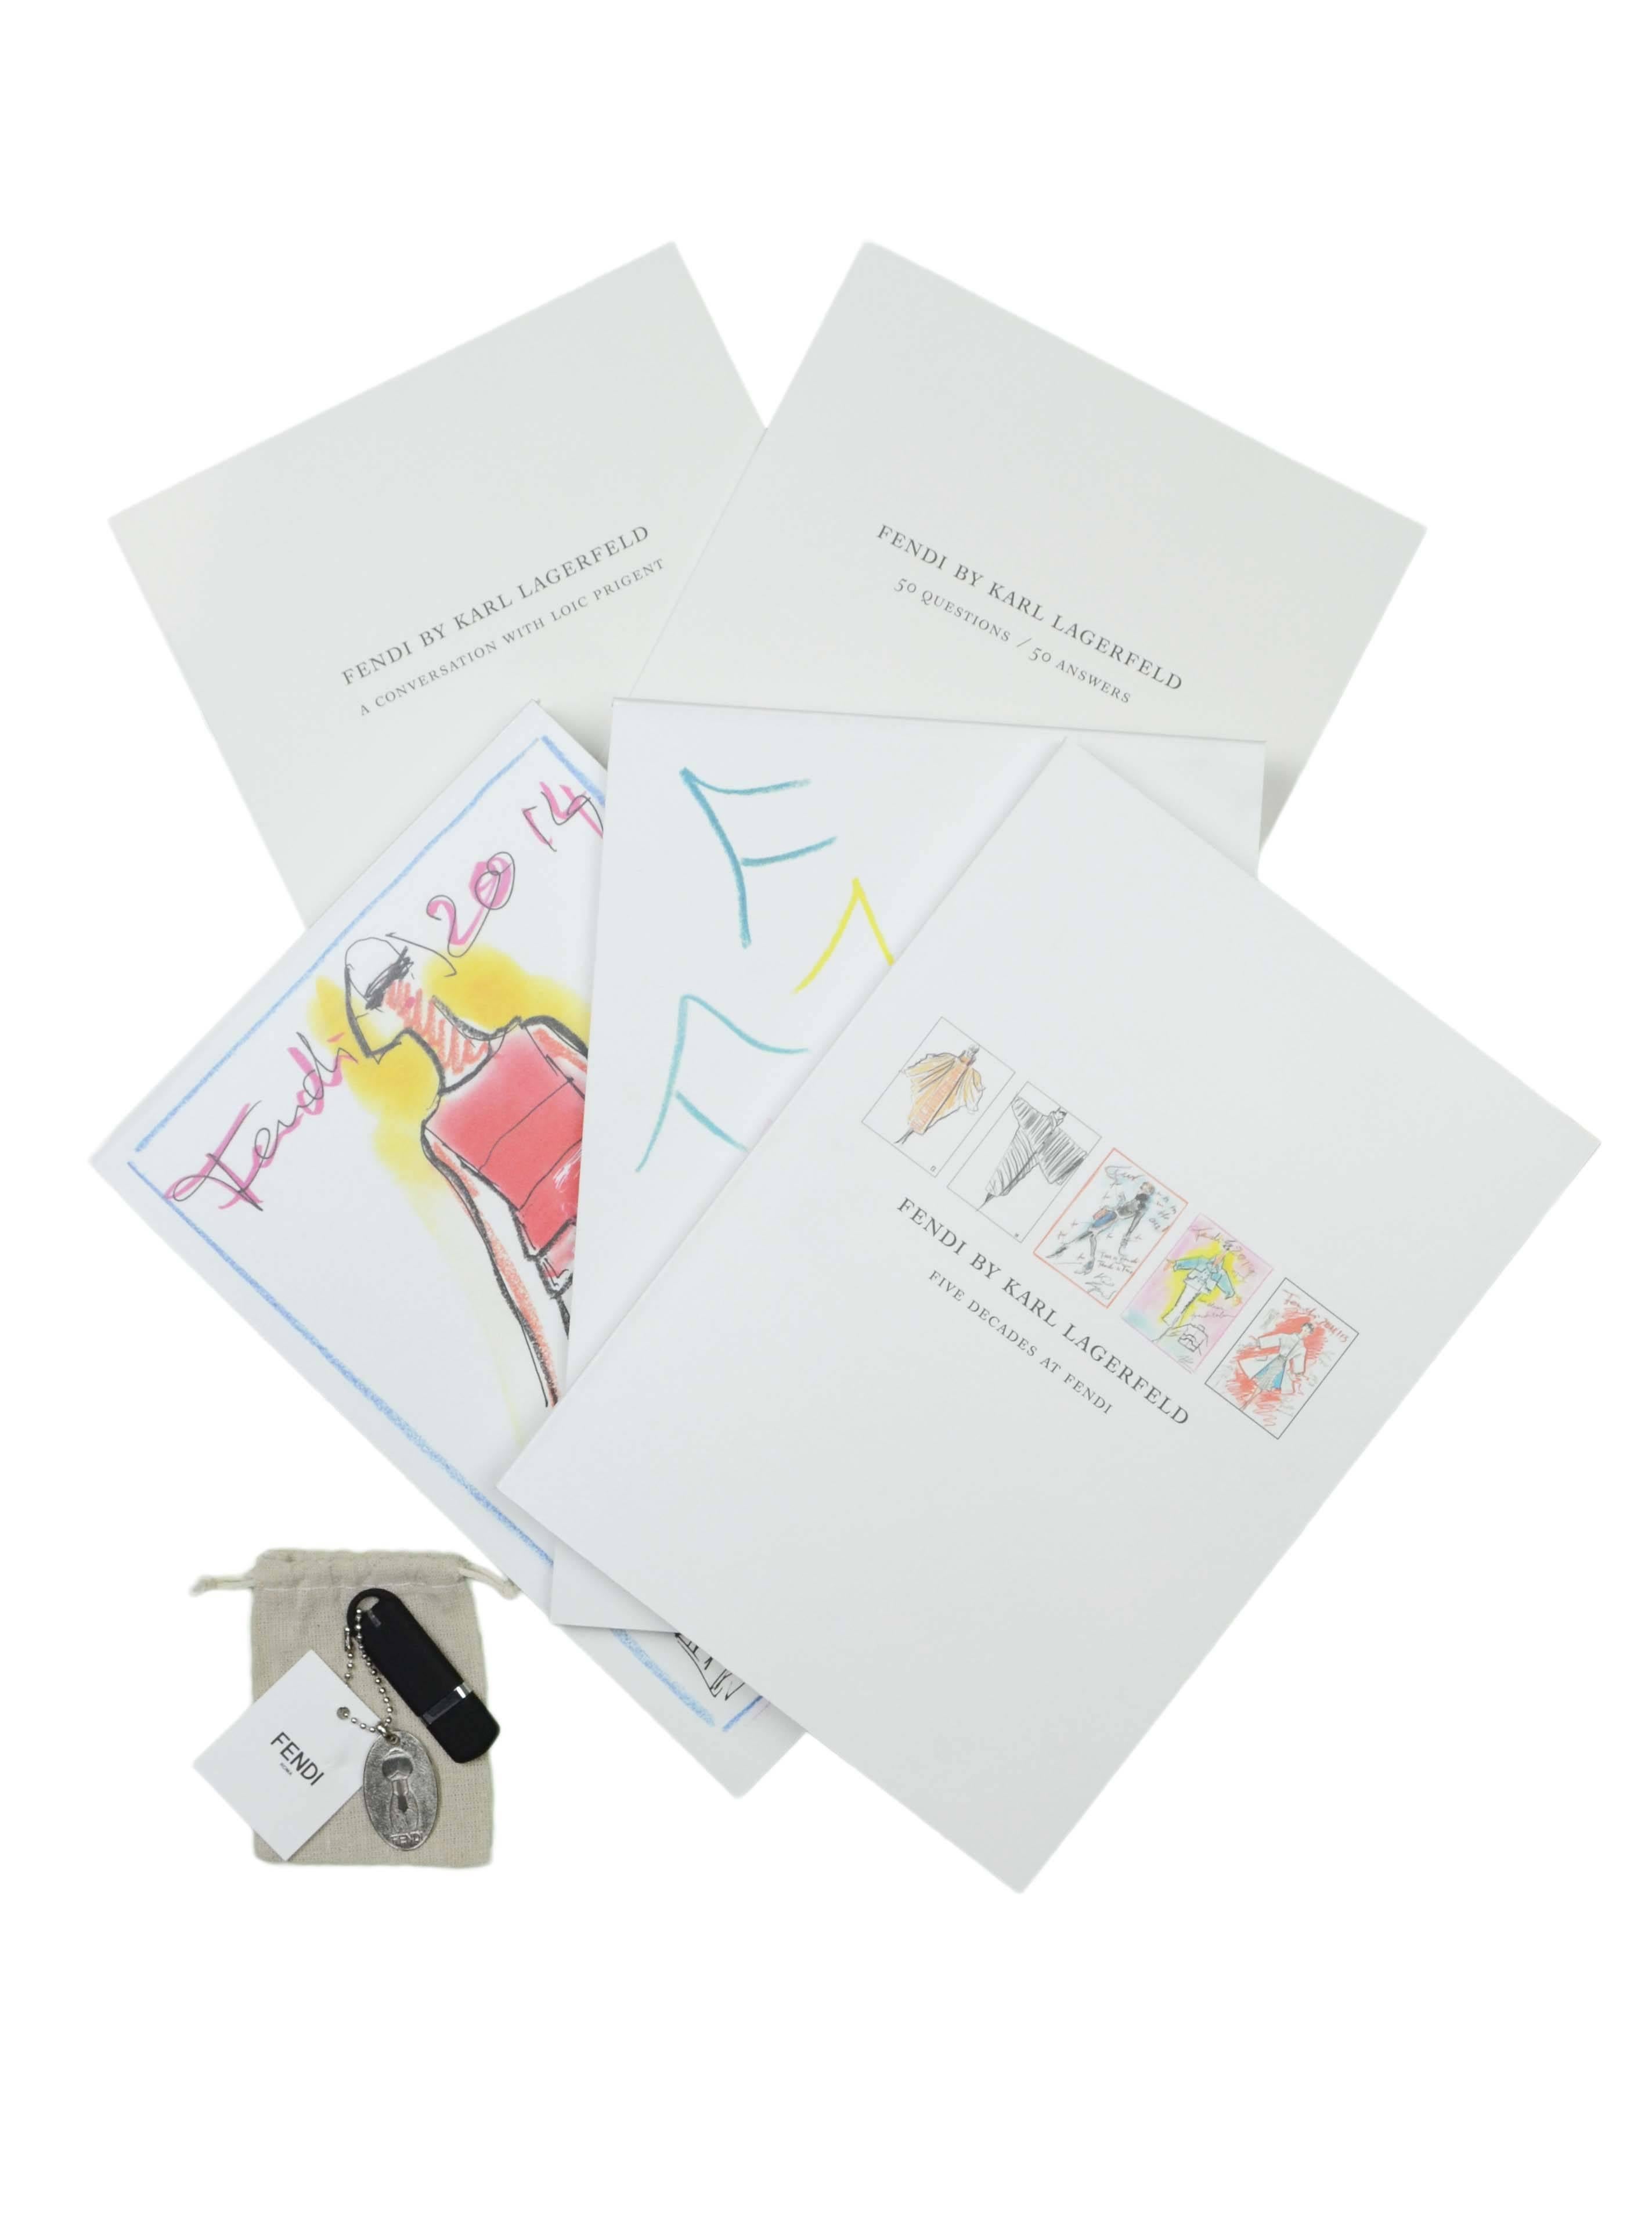 Fendi By Karl Lagerfeld 50 Year Collectors Box of Sketches, Poster & USB
Features sketches by Karl throughout the books, a USB with video and a poster of Karl
Made In: Germany
Year of Production: 2015
Designed By: Karl Lagerfeld & Gerhard